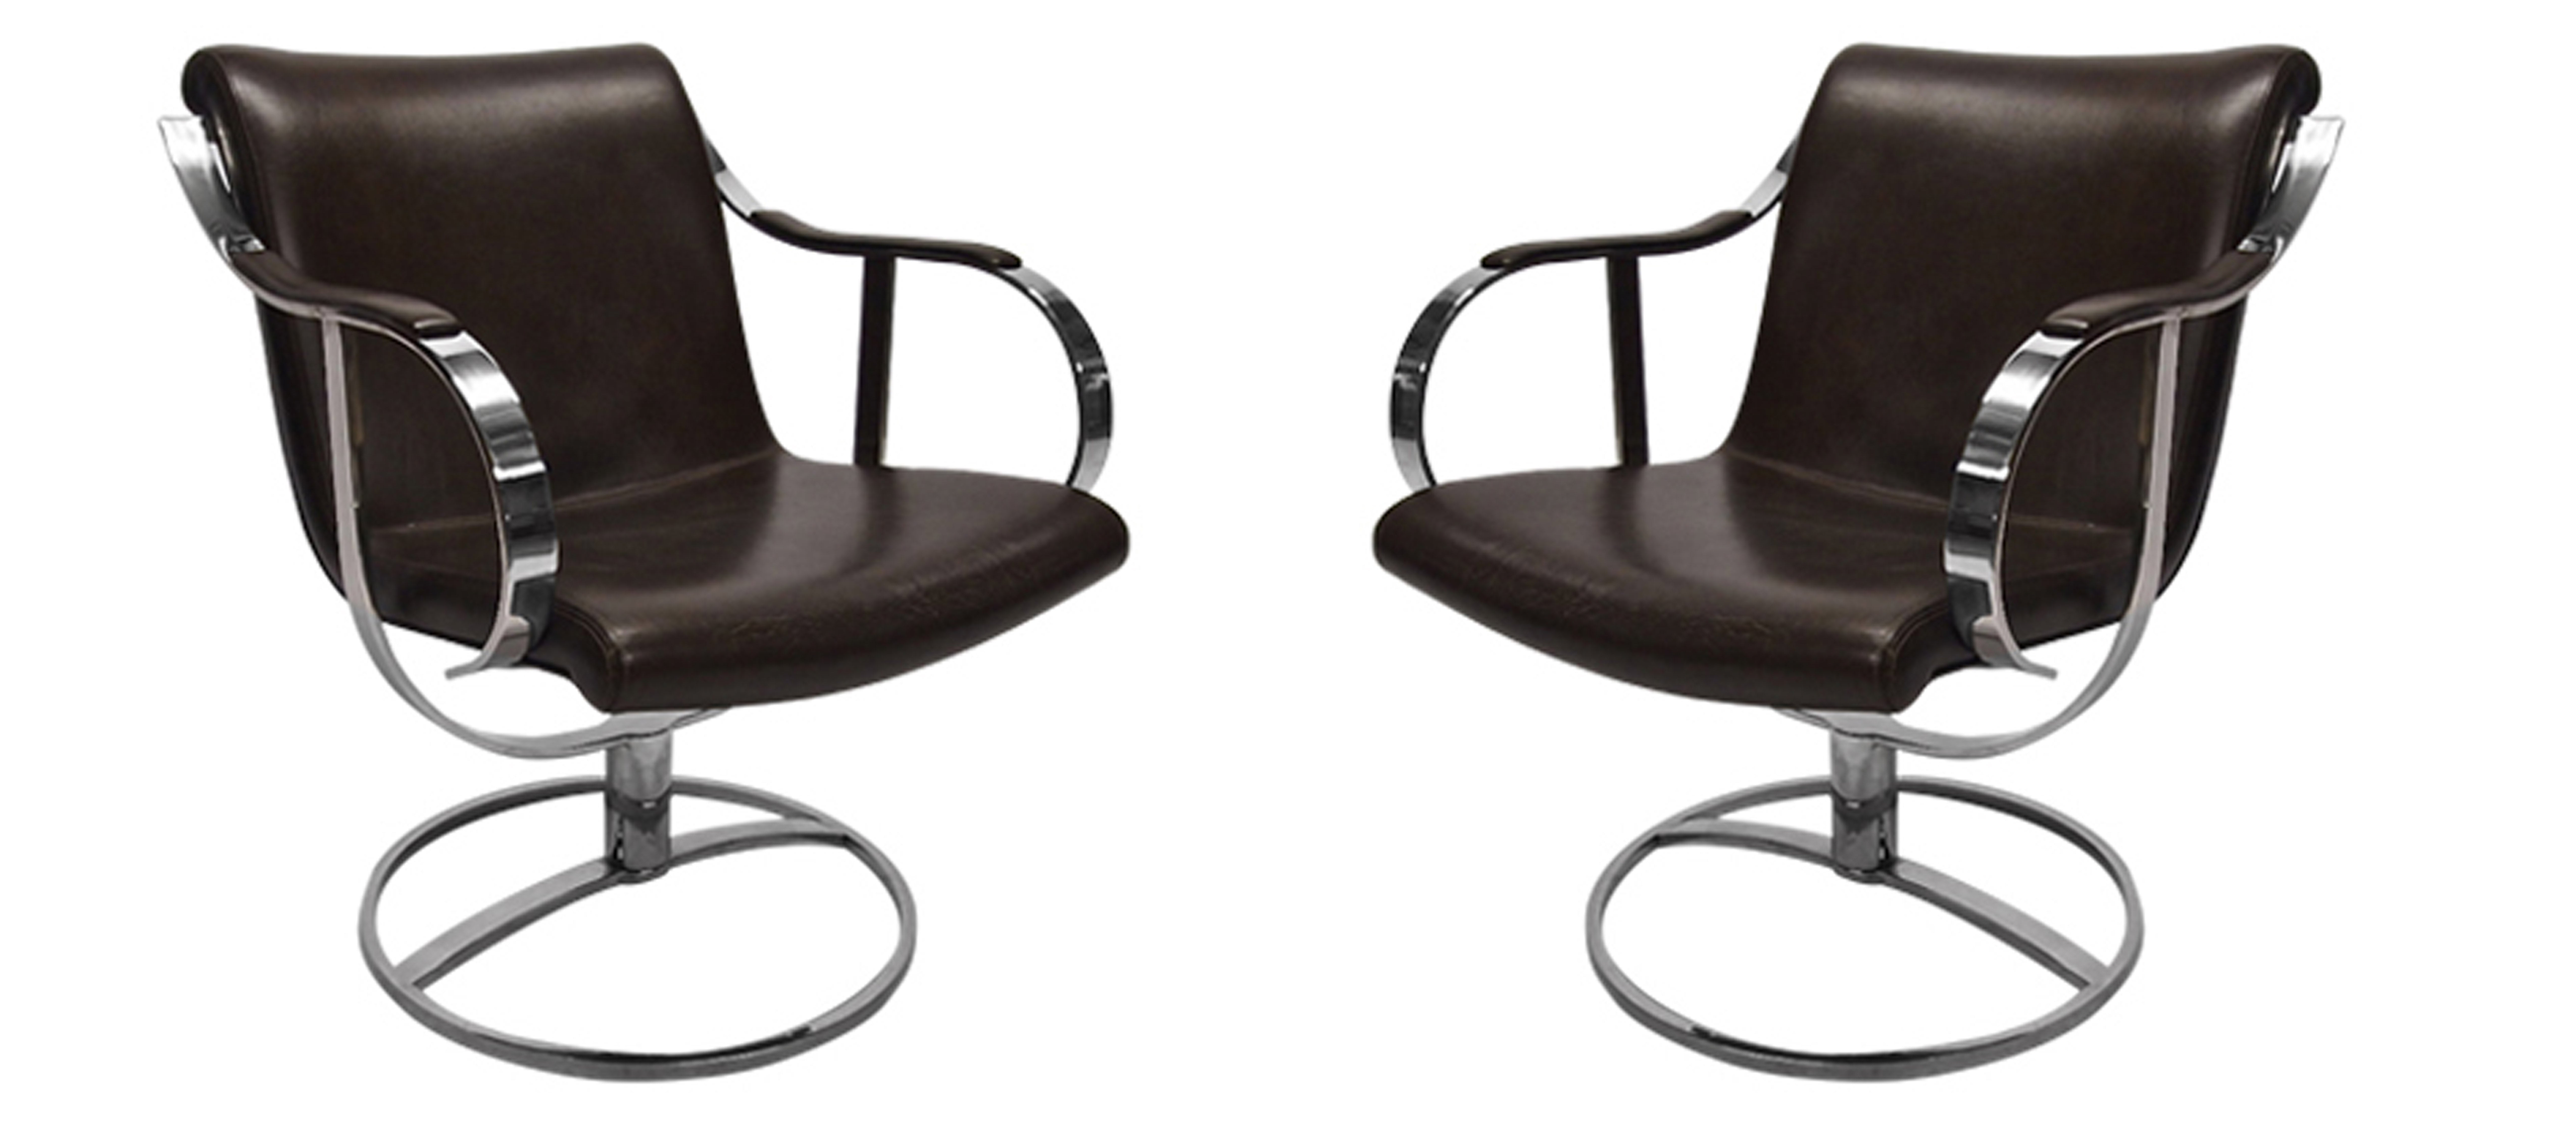 Pair of Chairs by Gardner Leaver for Steelcase Circa 1971 American